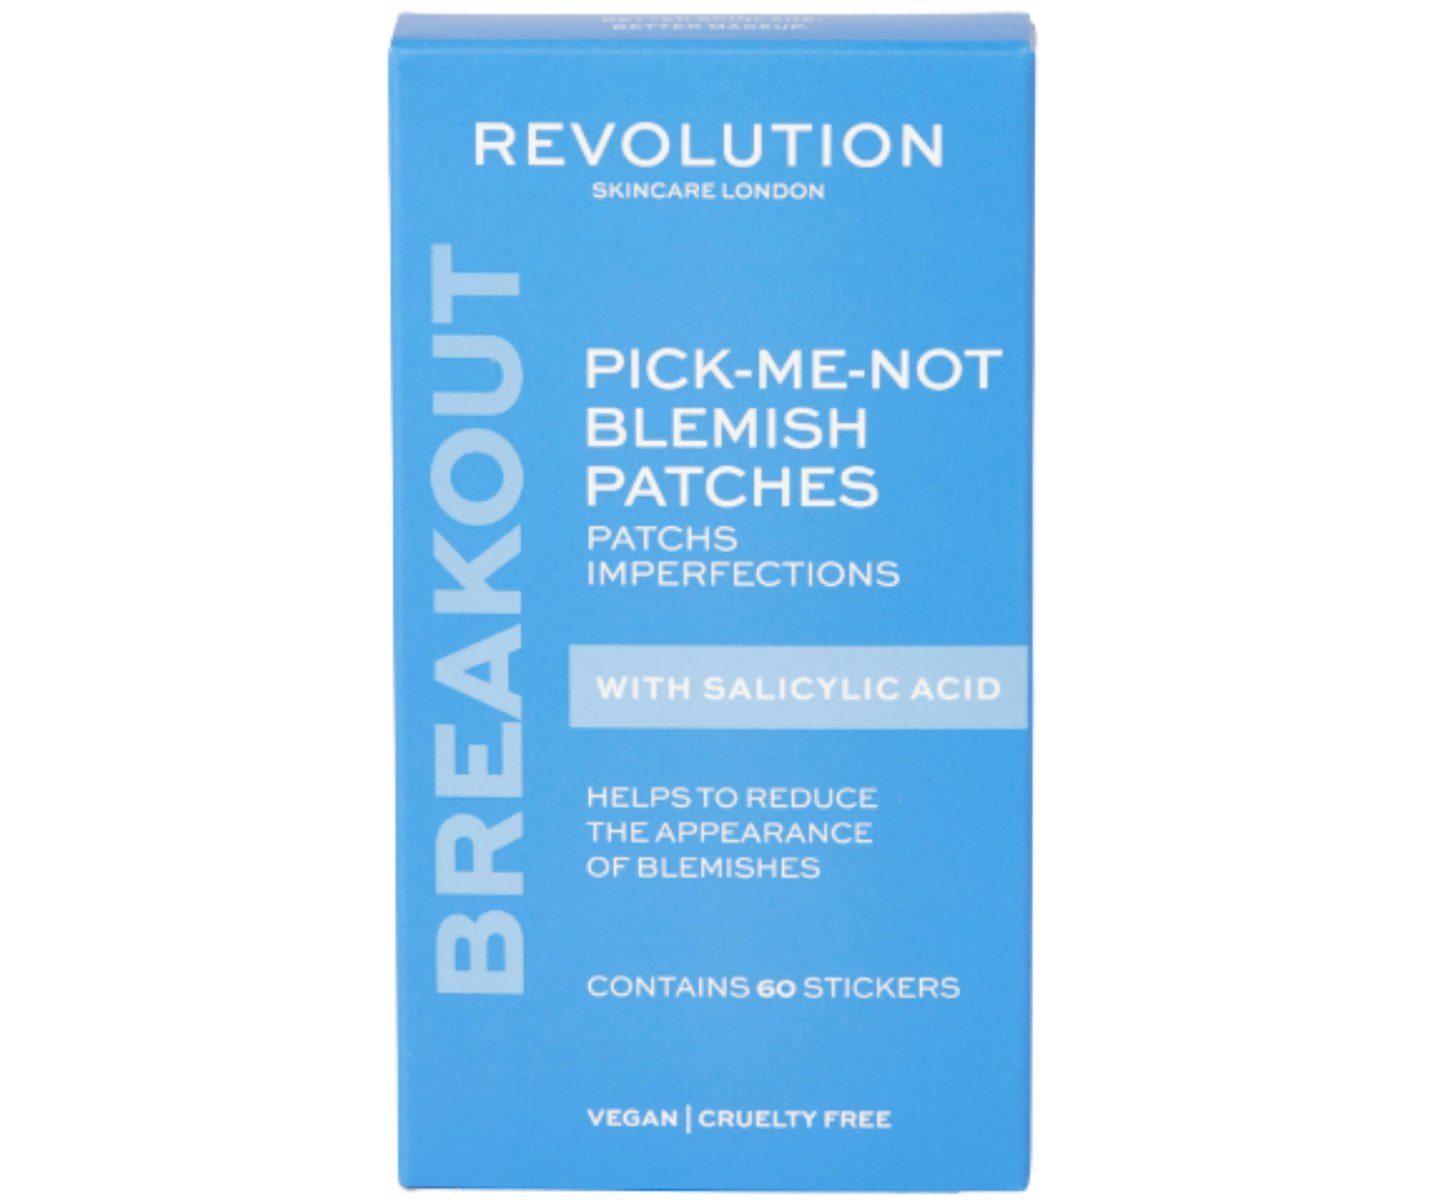 A picture of the Revolution Skincare Pick Me Not Blemish Patches.